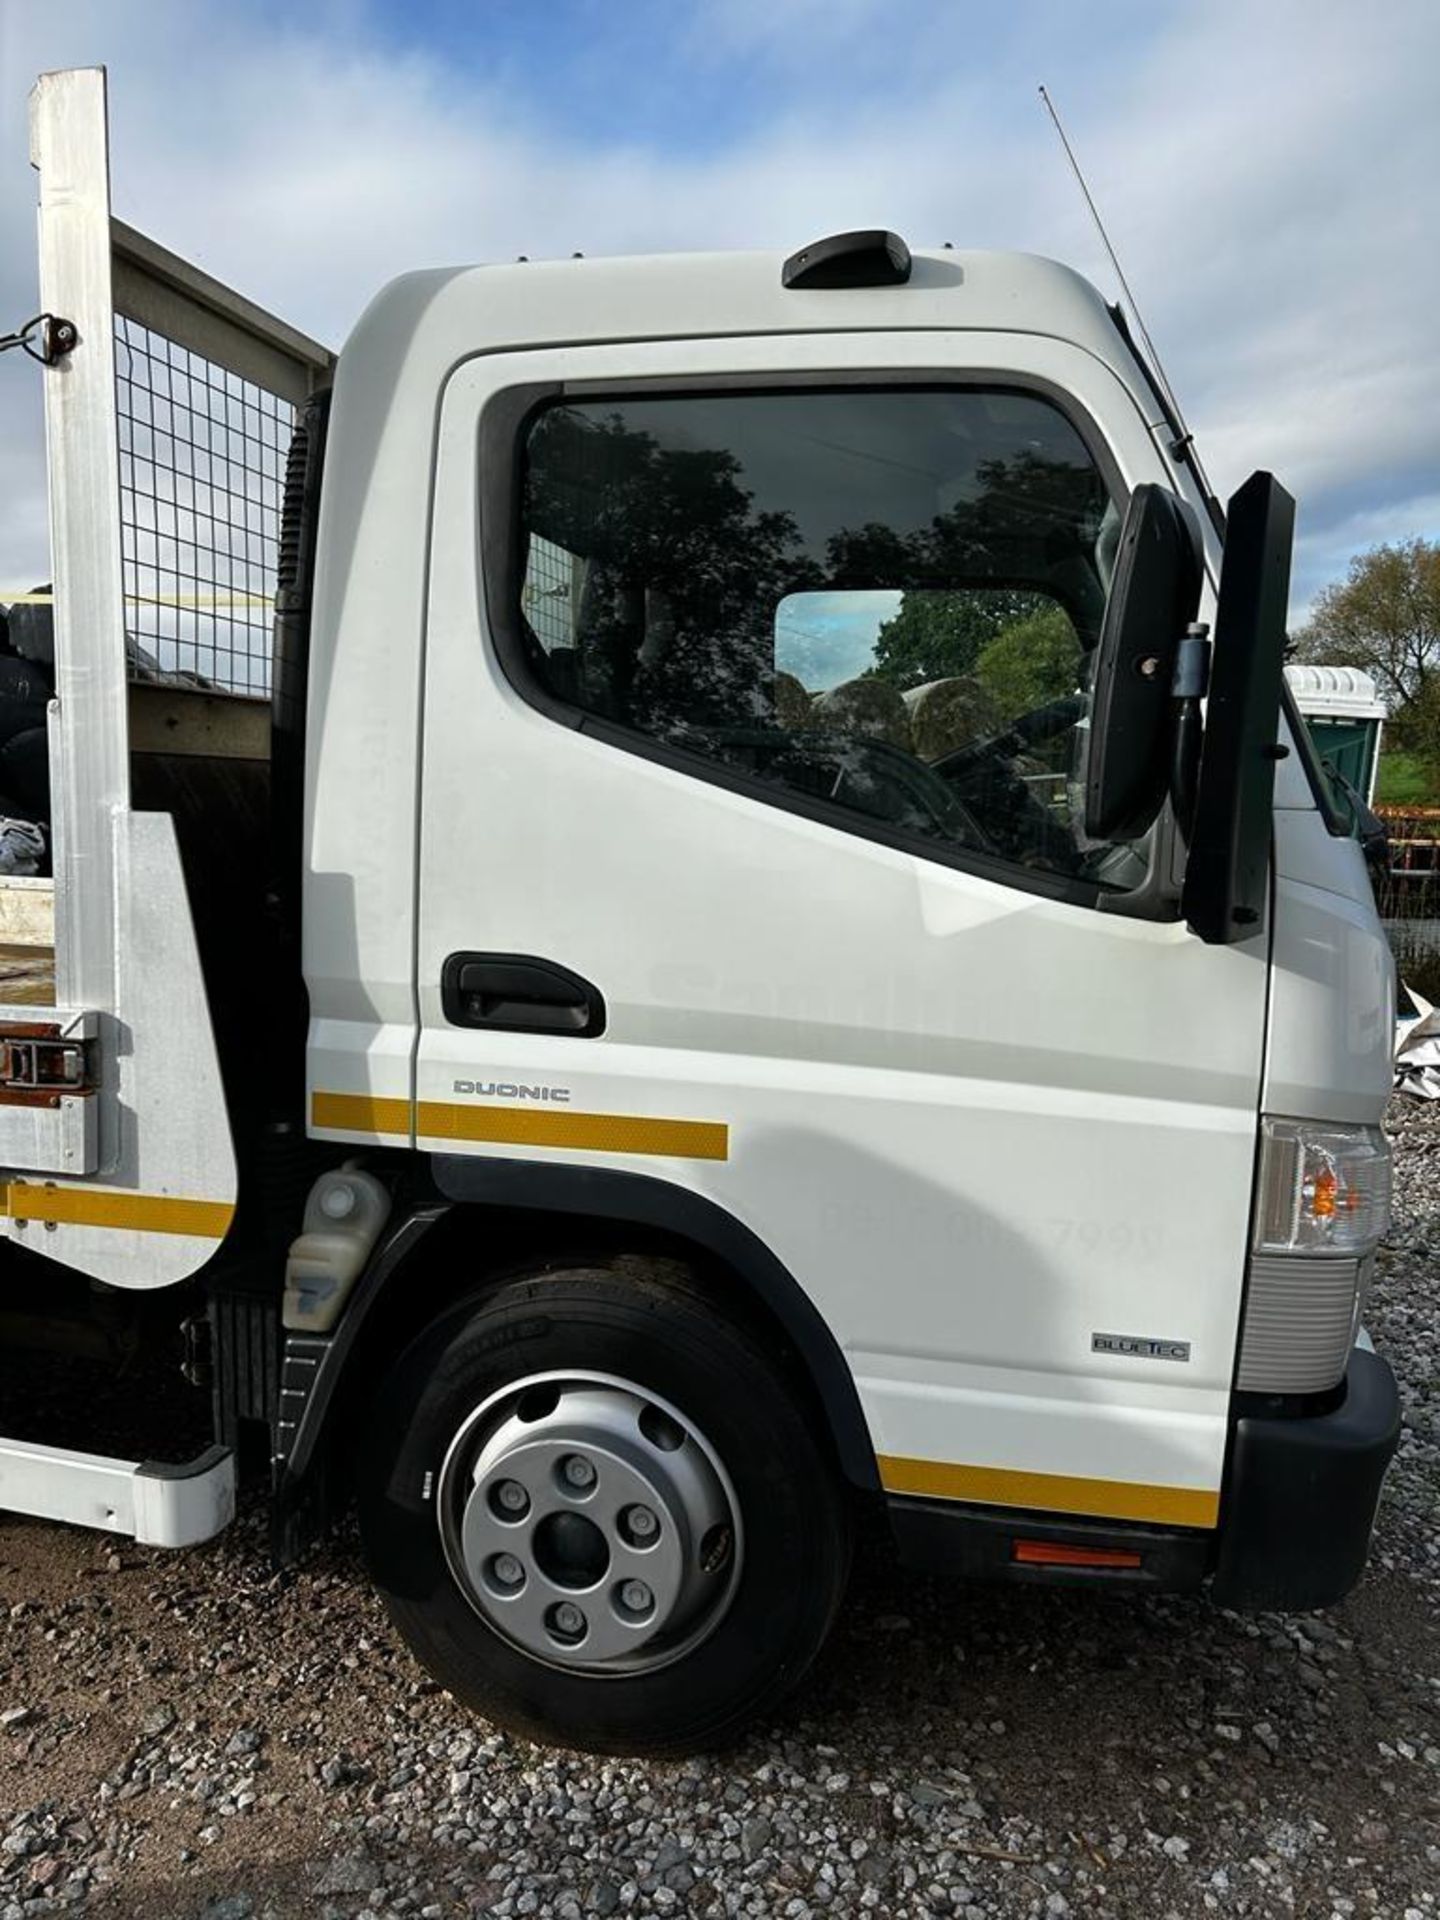 MITSUBISHI FUSO CANTER 7C1534 DROPSIDE LORRY EURO VI C GN68VXS FIRST REG 2019 MOT AUGUST 2024 HAD - Image 3 of 8